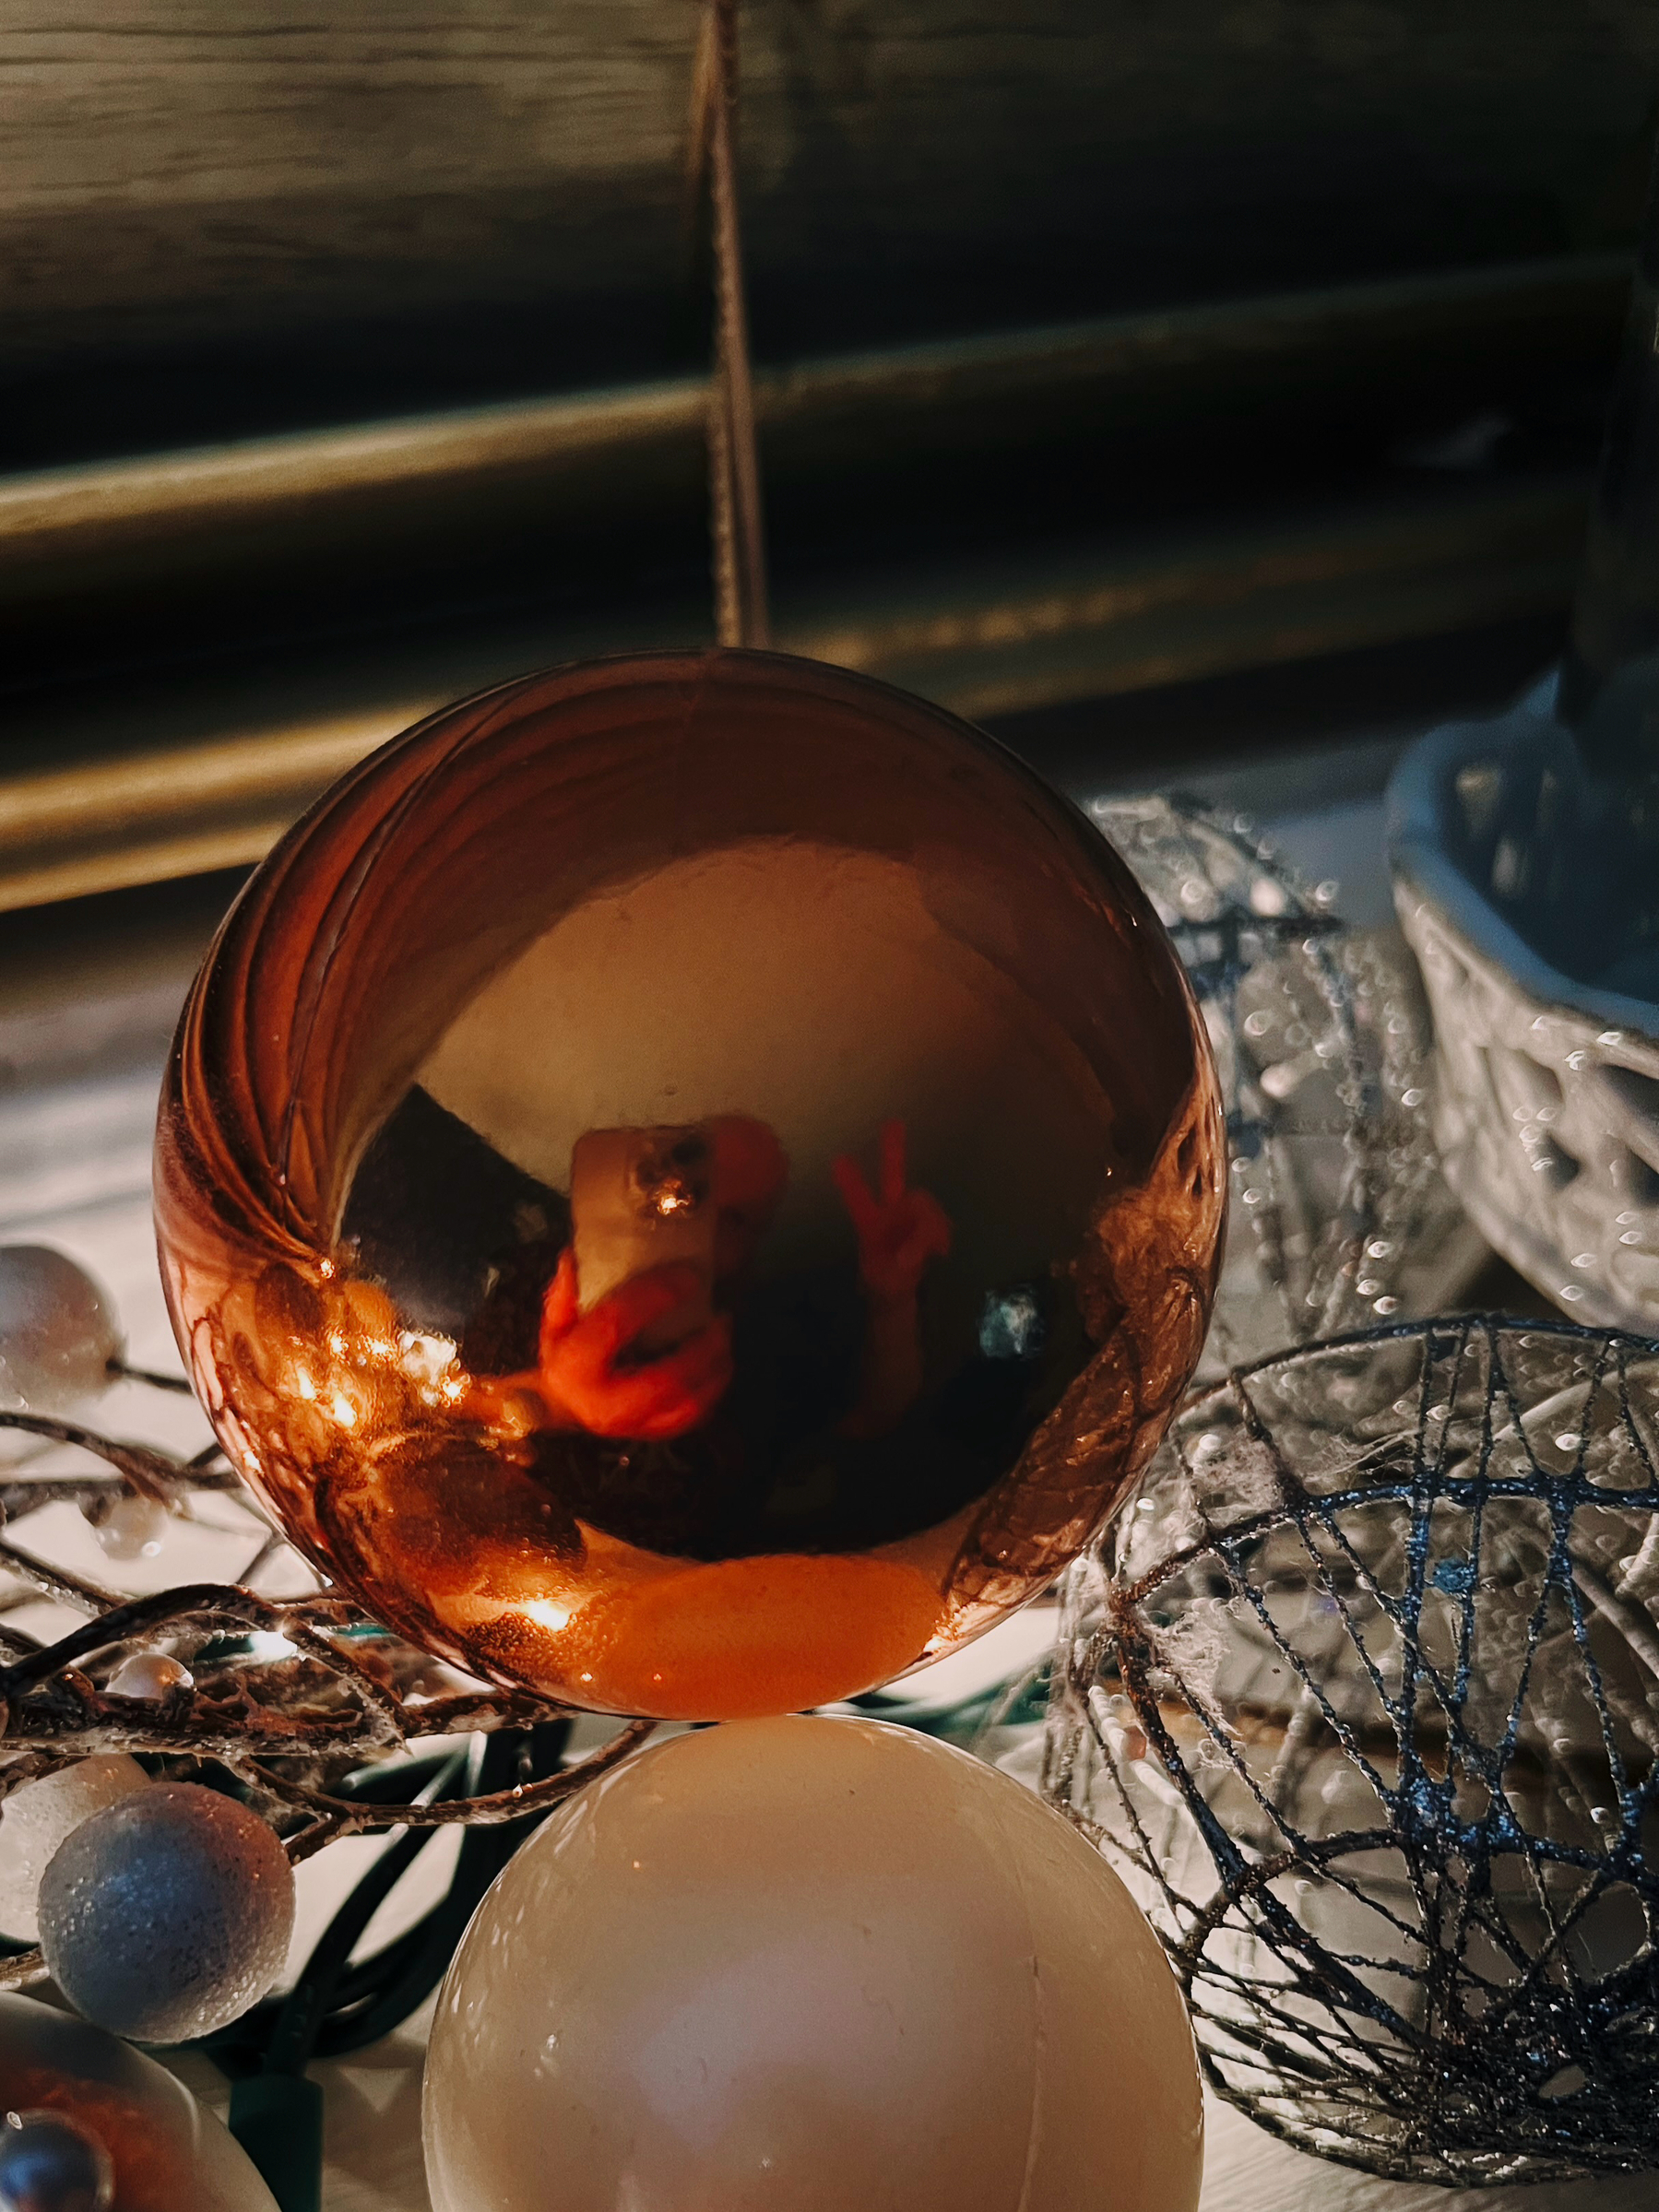 Selfie of my reflection in a spherical orange Christmas ornament, surrounded by white lights, garland, and other smaller ornaments on the window ledge. In my reflection I’m peeking out from behind the phone and giving the peace sign.